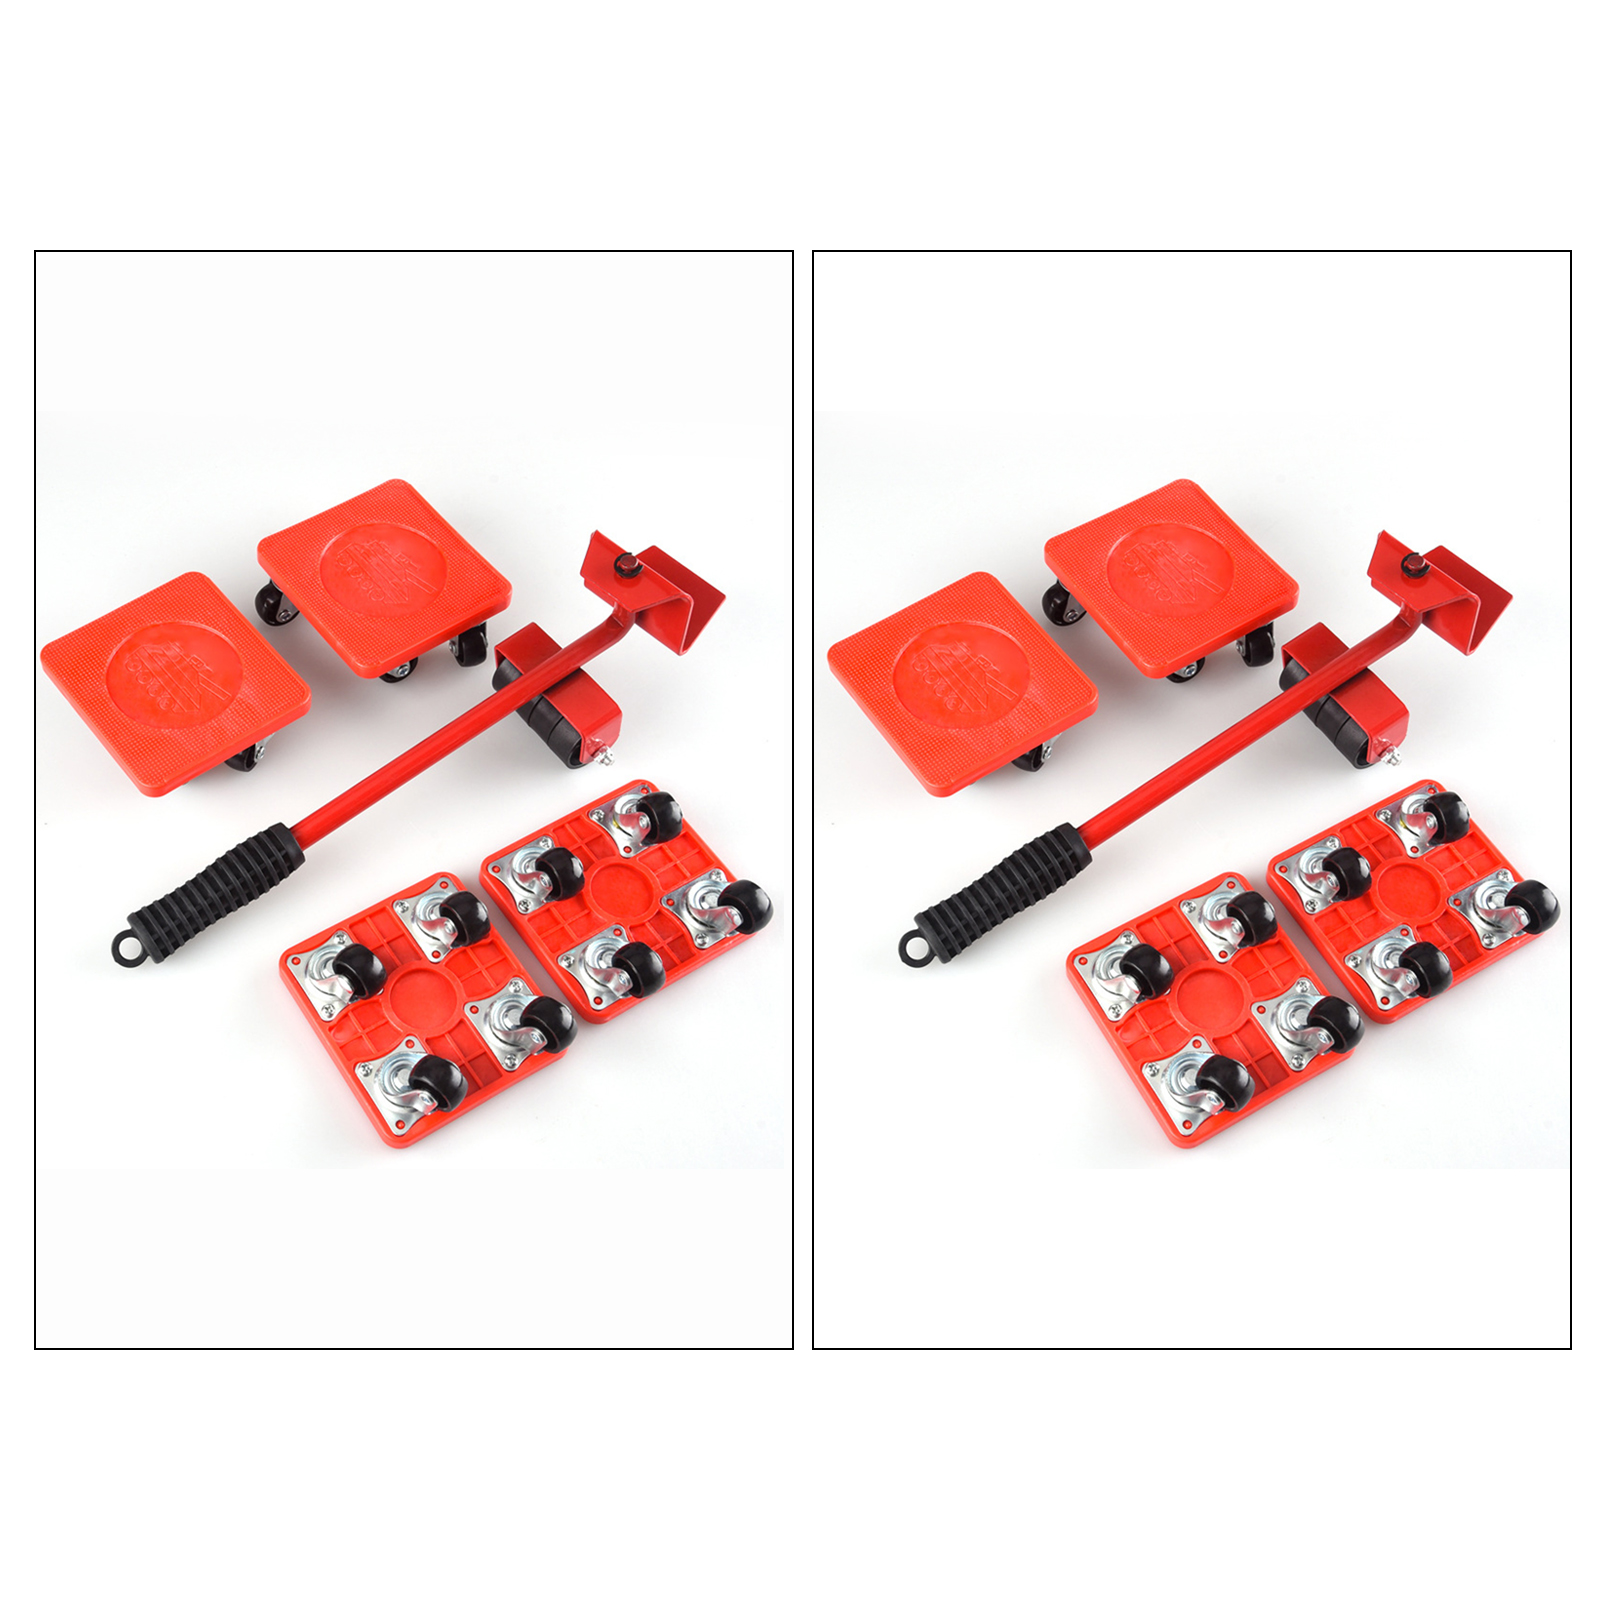 5pcs/set Furniture Lifter Sliders Kit Furniture Roller Move Tool Wheel Bar Mover Device Lifting System Tools for home